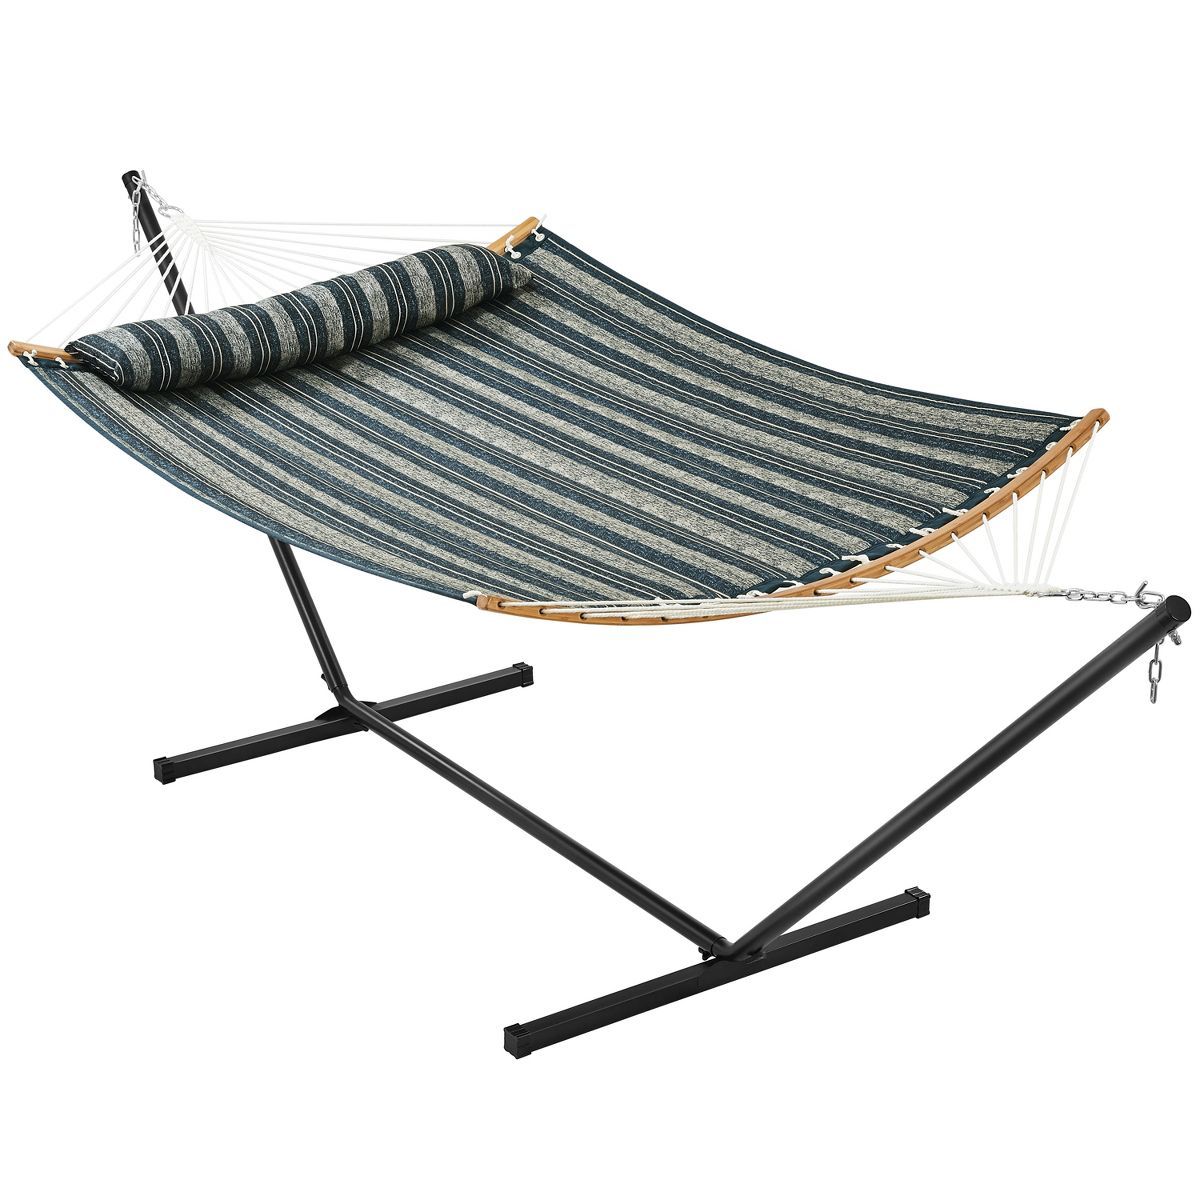 Yaheetech Padded Hammock with Universal Steel Stand | Target